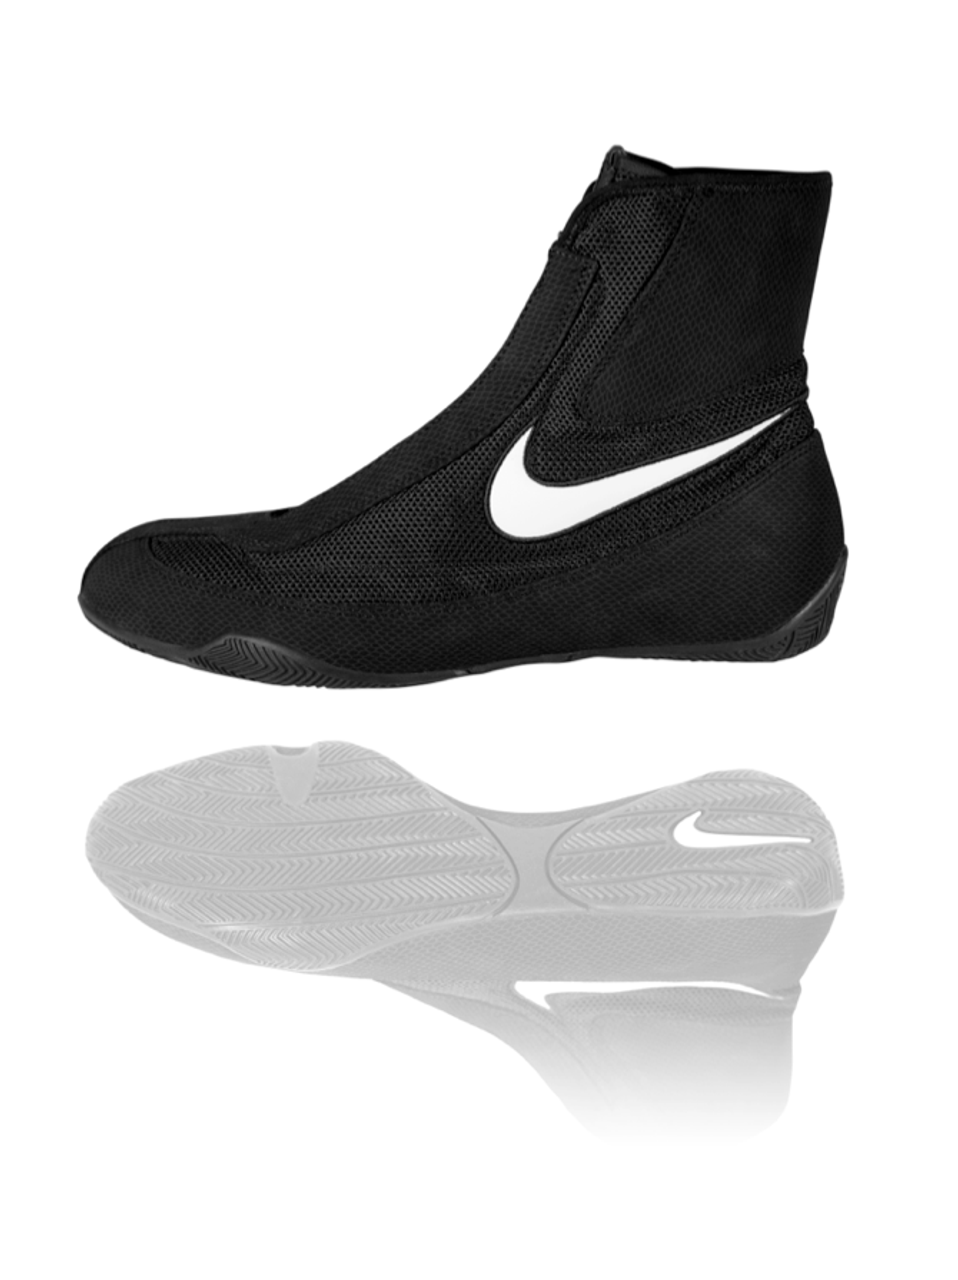 new nike products